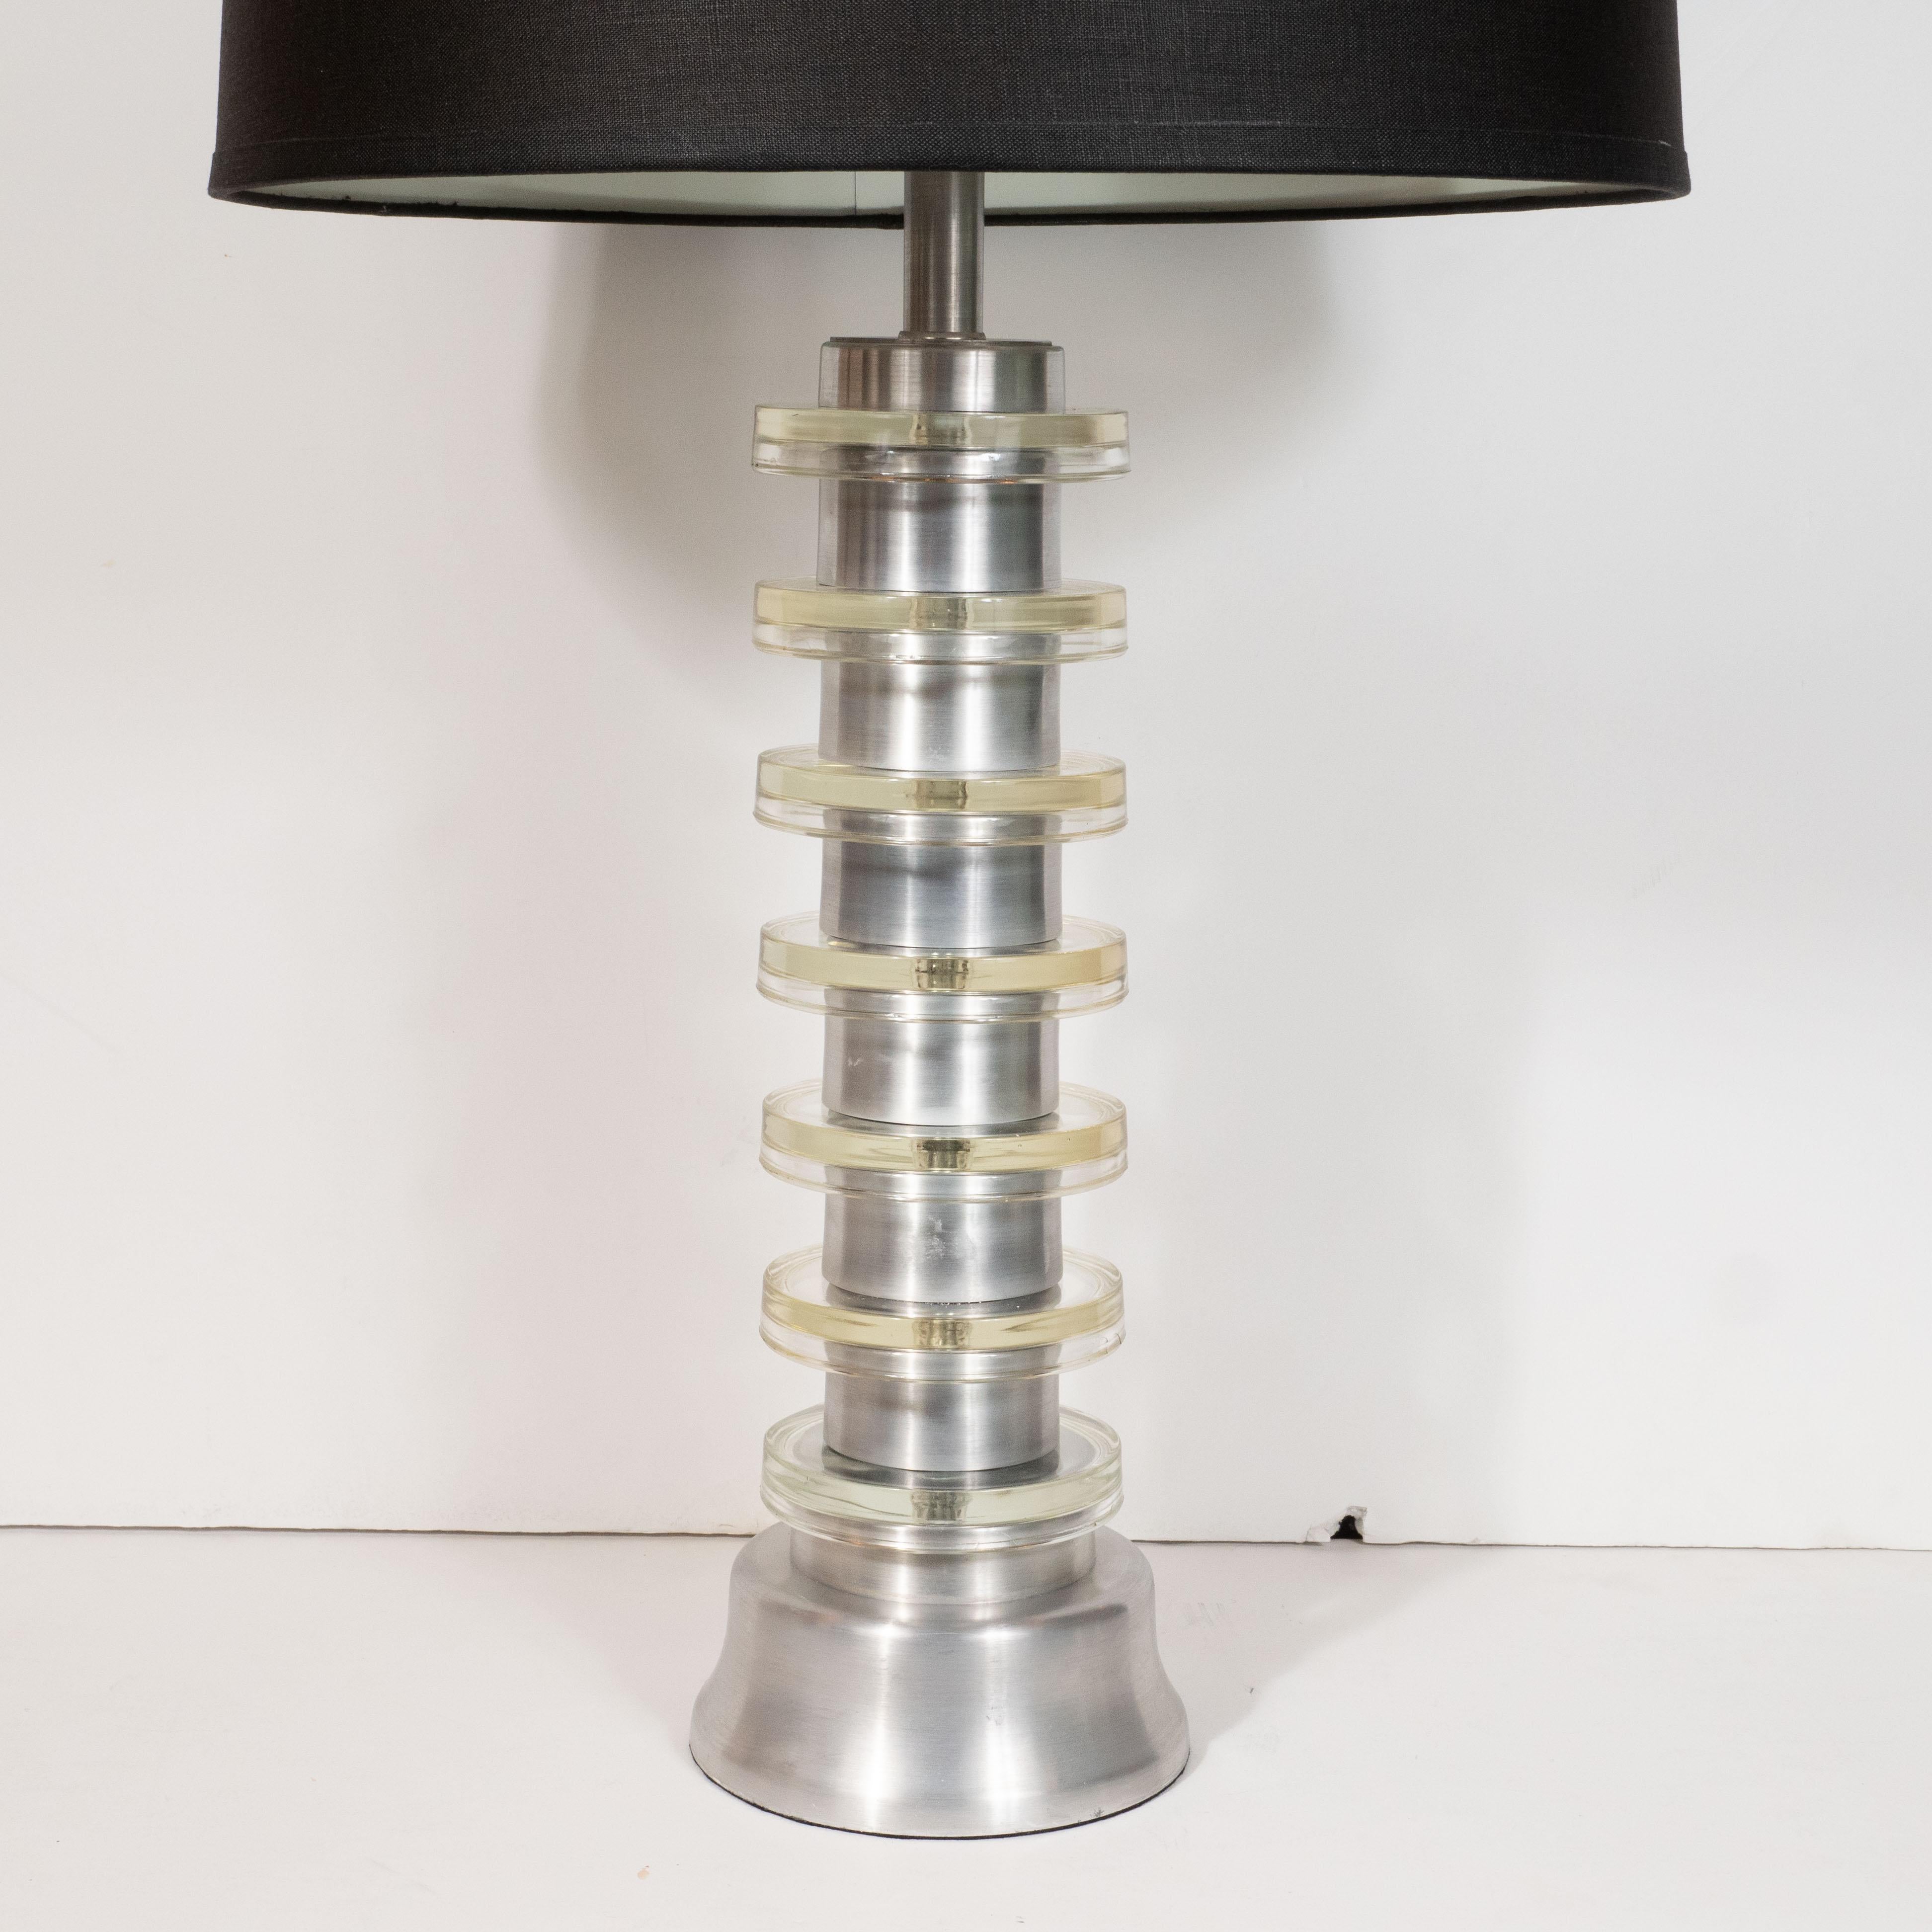 This sophisticated and sculptural pair of Art Deco Skyscraper style Machine Age table lamps were designed by the legendary Russell Wright in America, circa 1940. They feature brushed cylindrical aluminum bodies ringed with seven tiers of circular